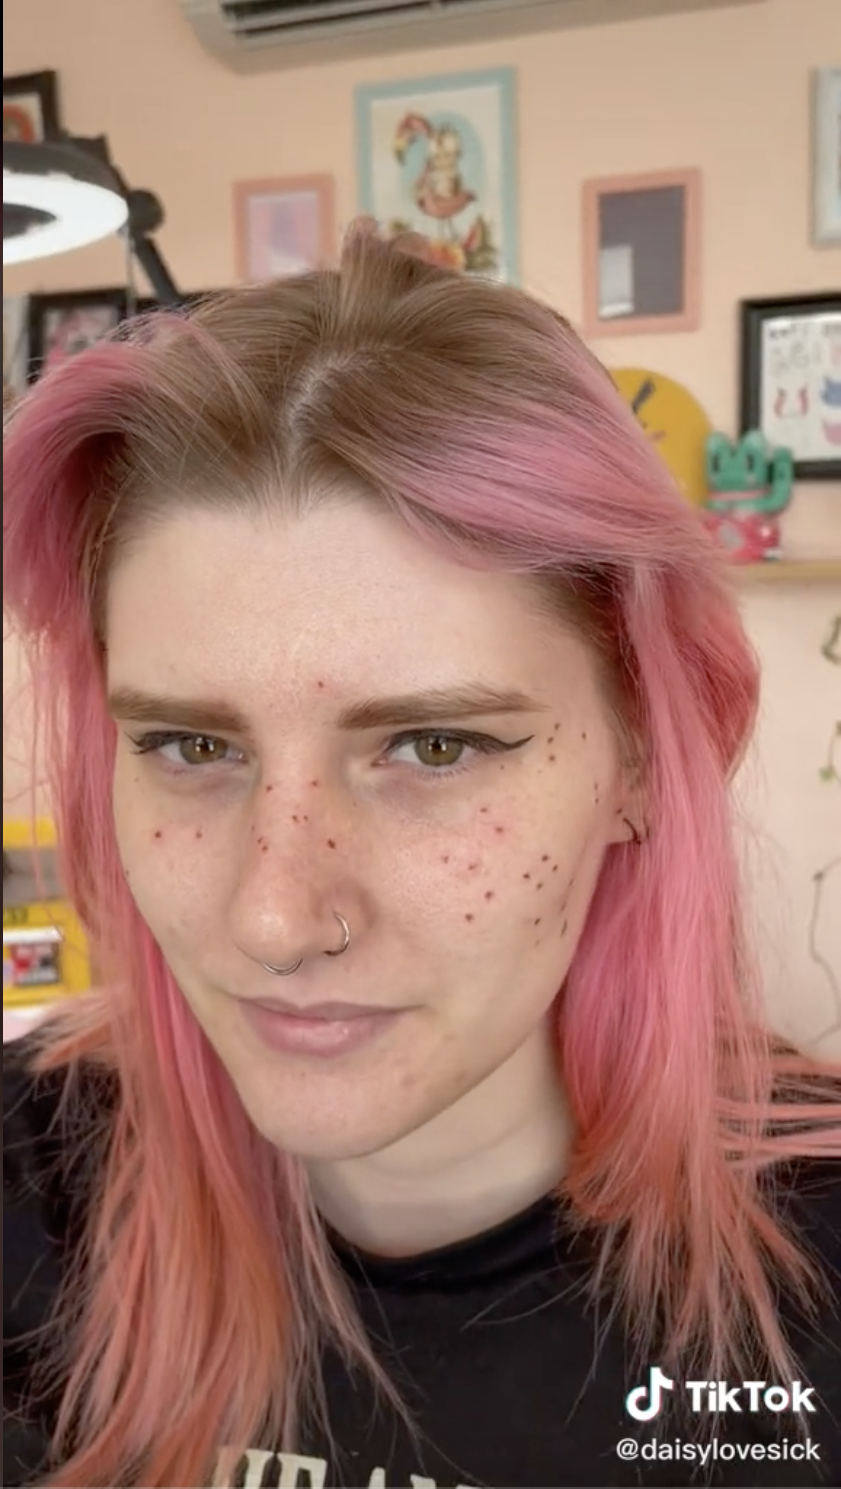 Everything You Need to Know About Faux Freckles